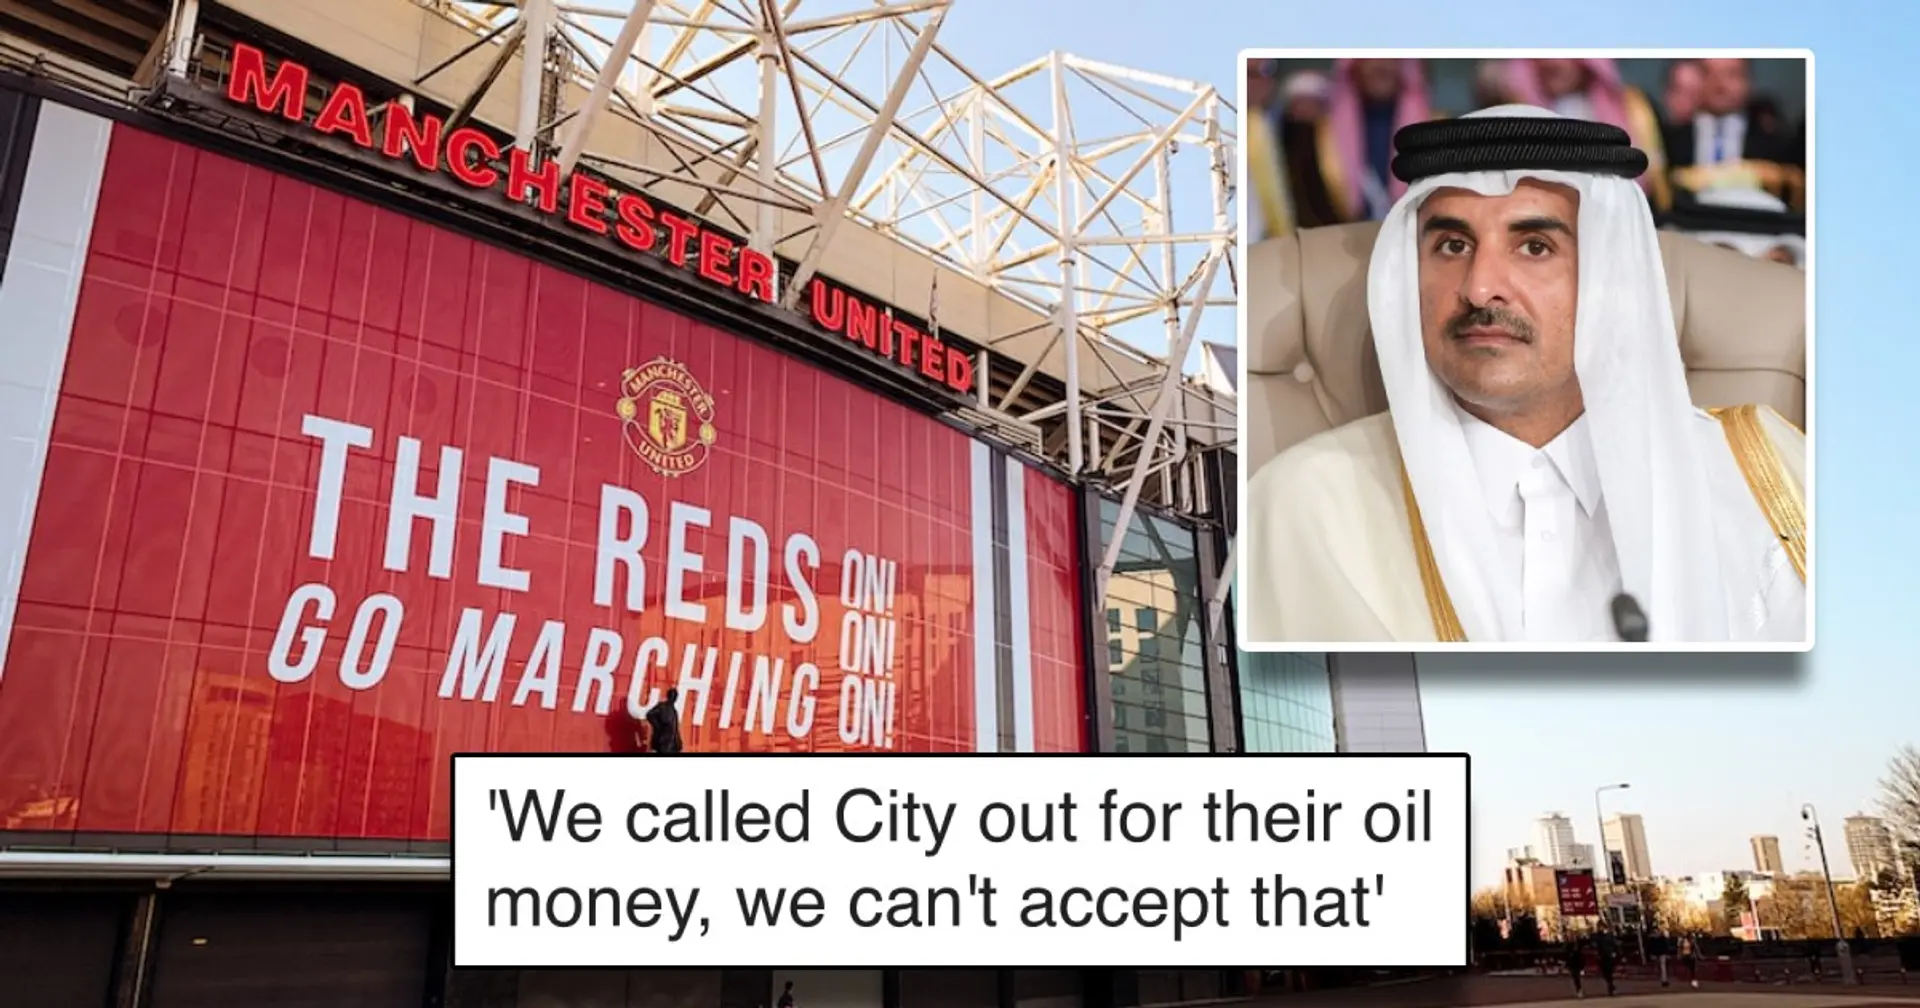 'United fans should protest, we can't become City': Fans react to Qatari mega-money bid expected for Man United